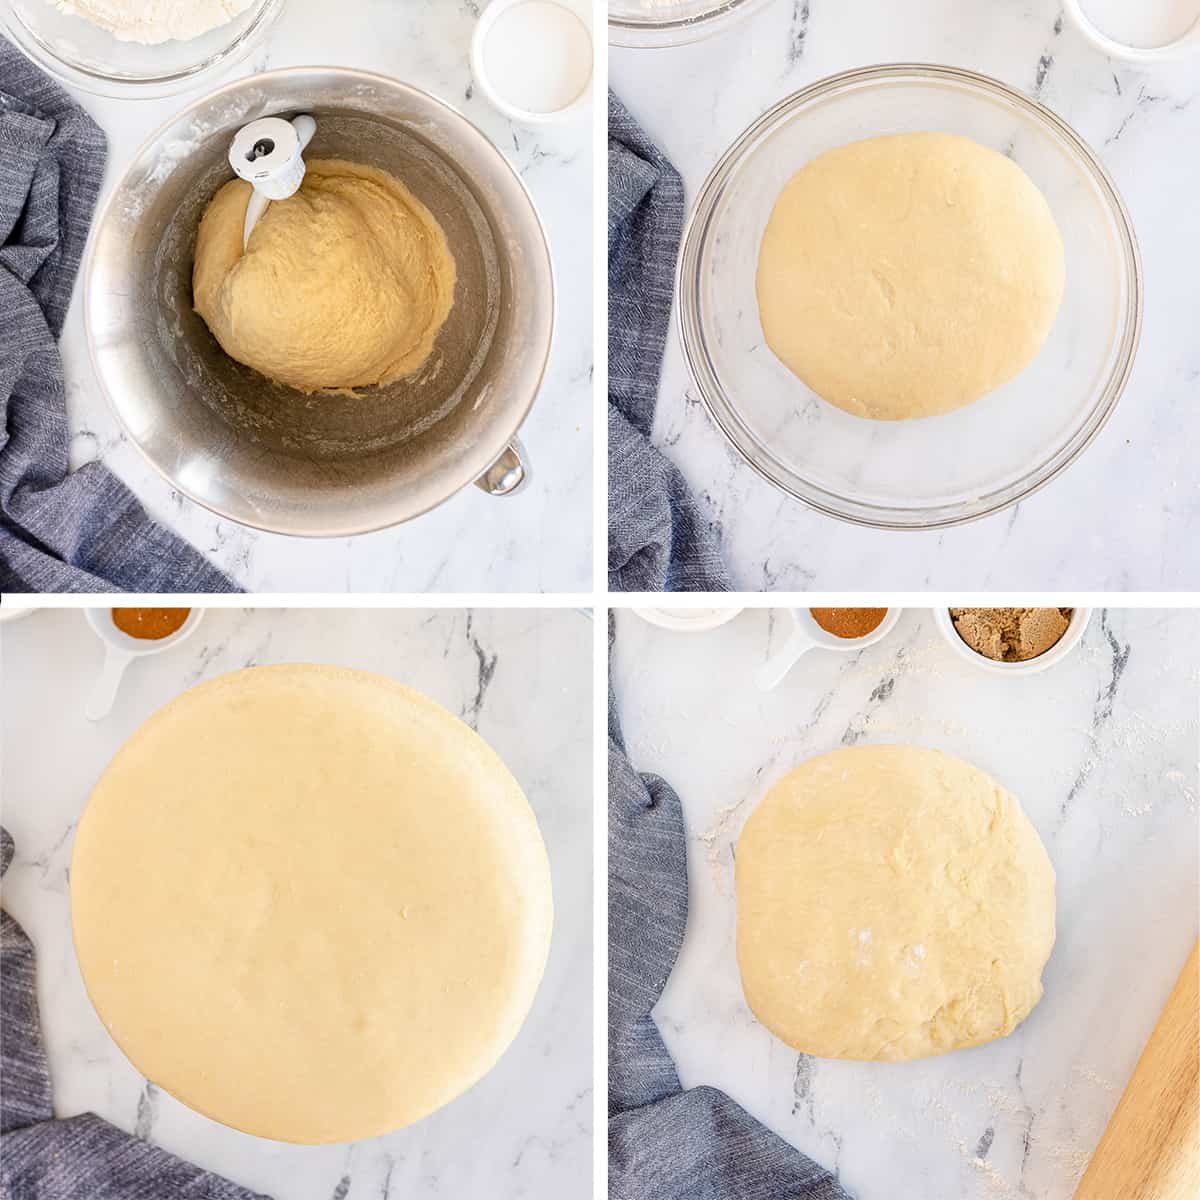 Dough in the bowl of a mixer and in a glass mixing bowl before and after rising.